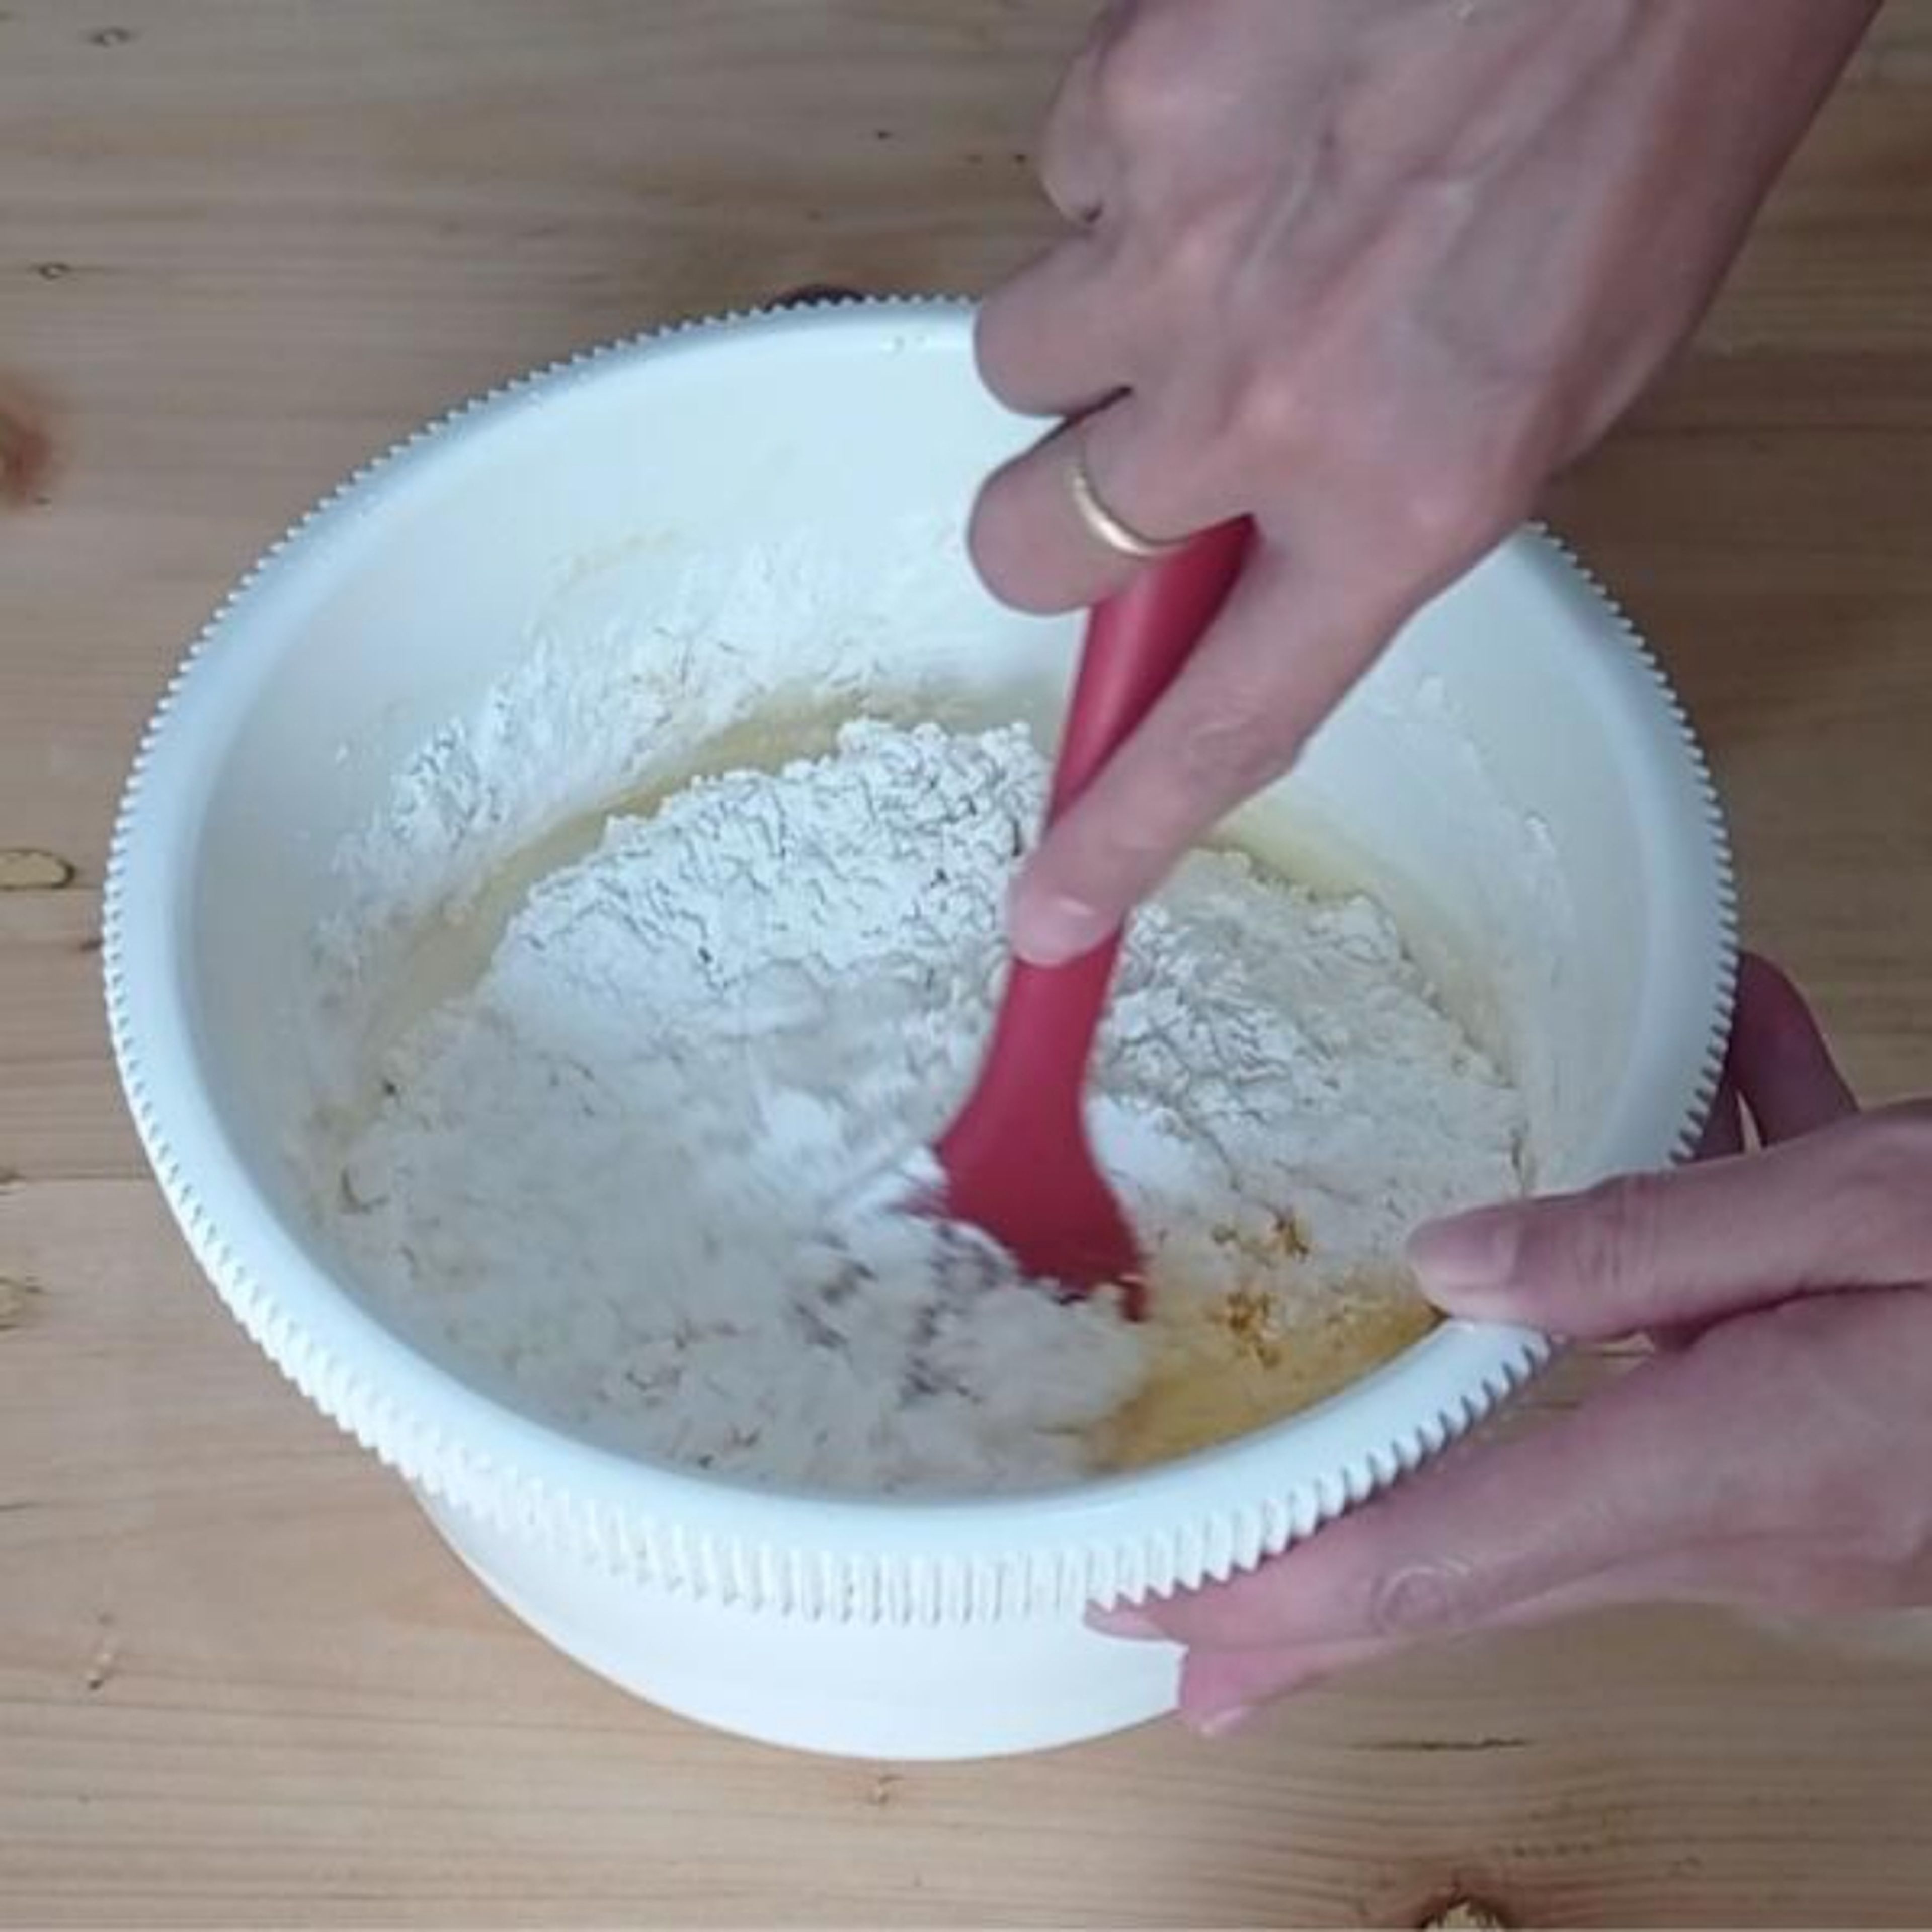 Sift the flour and baking powder into the butter mixture and mix well with spatula until there are no more flour streaks.